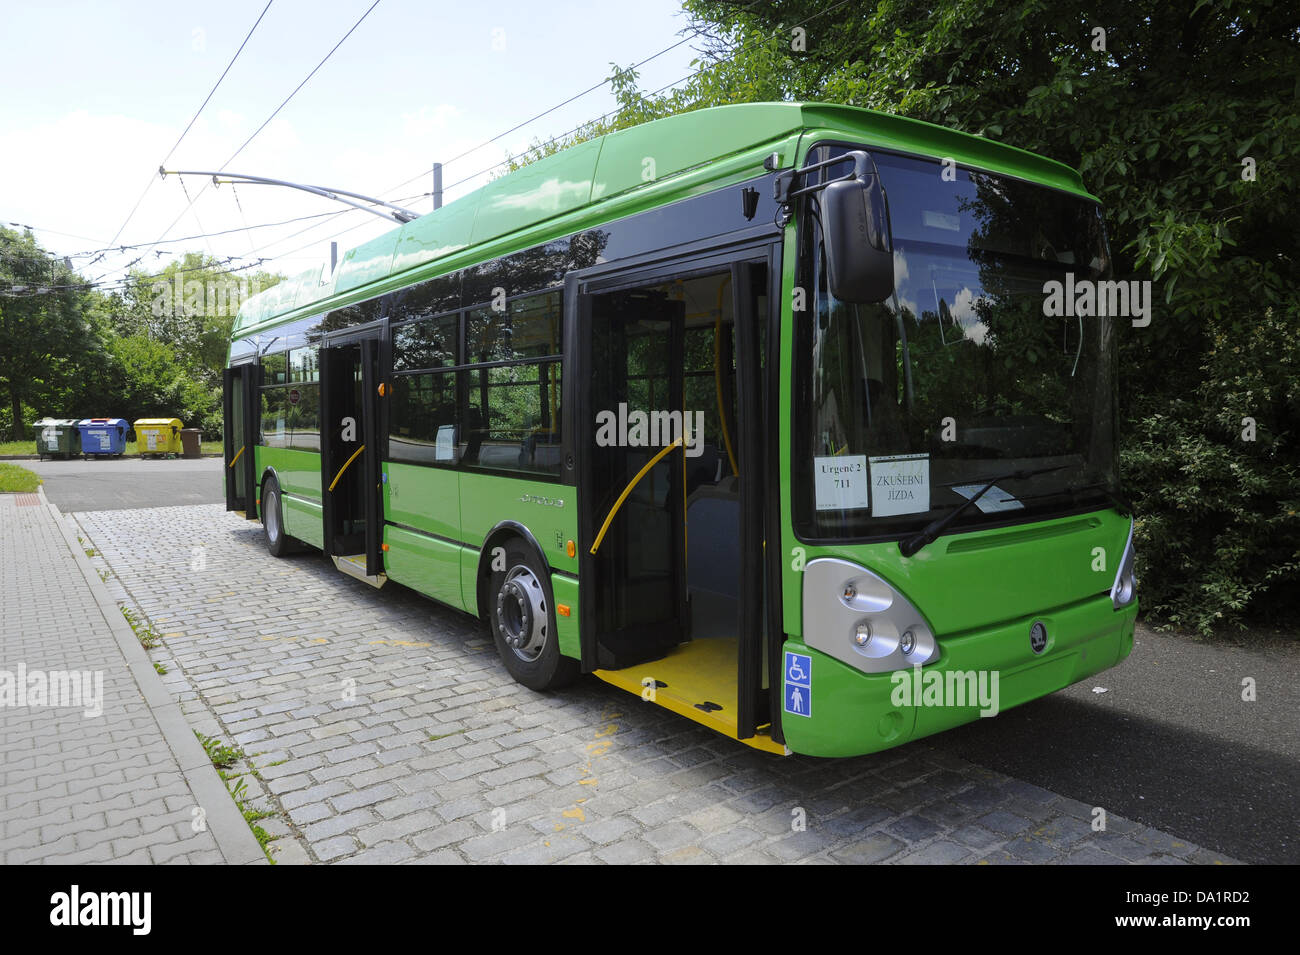 Skoda Electric, a subsidiary of Skoda Transportation, signed two major contracts for 130 trolley buses for 1.8 billion crowns. The Bulgarian capital Sofia will buy 50 buses for nearly 700 million crowns. Bratislava will buy 80 buses for 1.1 billion crowns. Pictured the new trolley during a test drive in the streets of Pilsen, Czech Republic, July 1, 2013. (CTK Photo/Petr Eret) Stock Photo